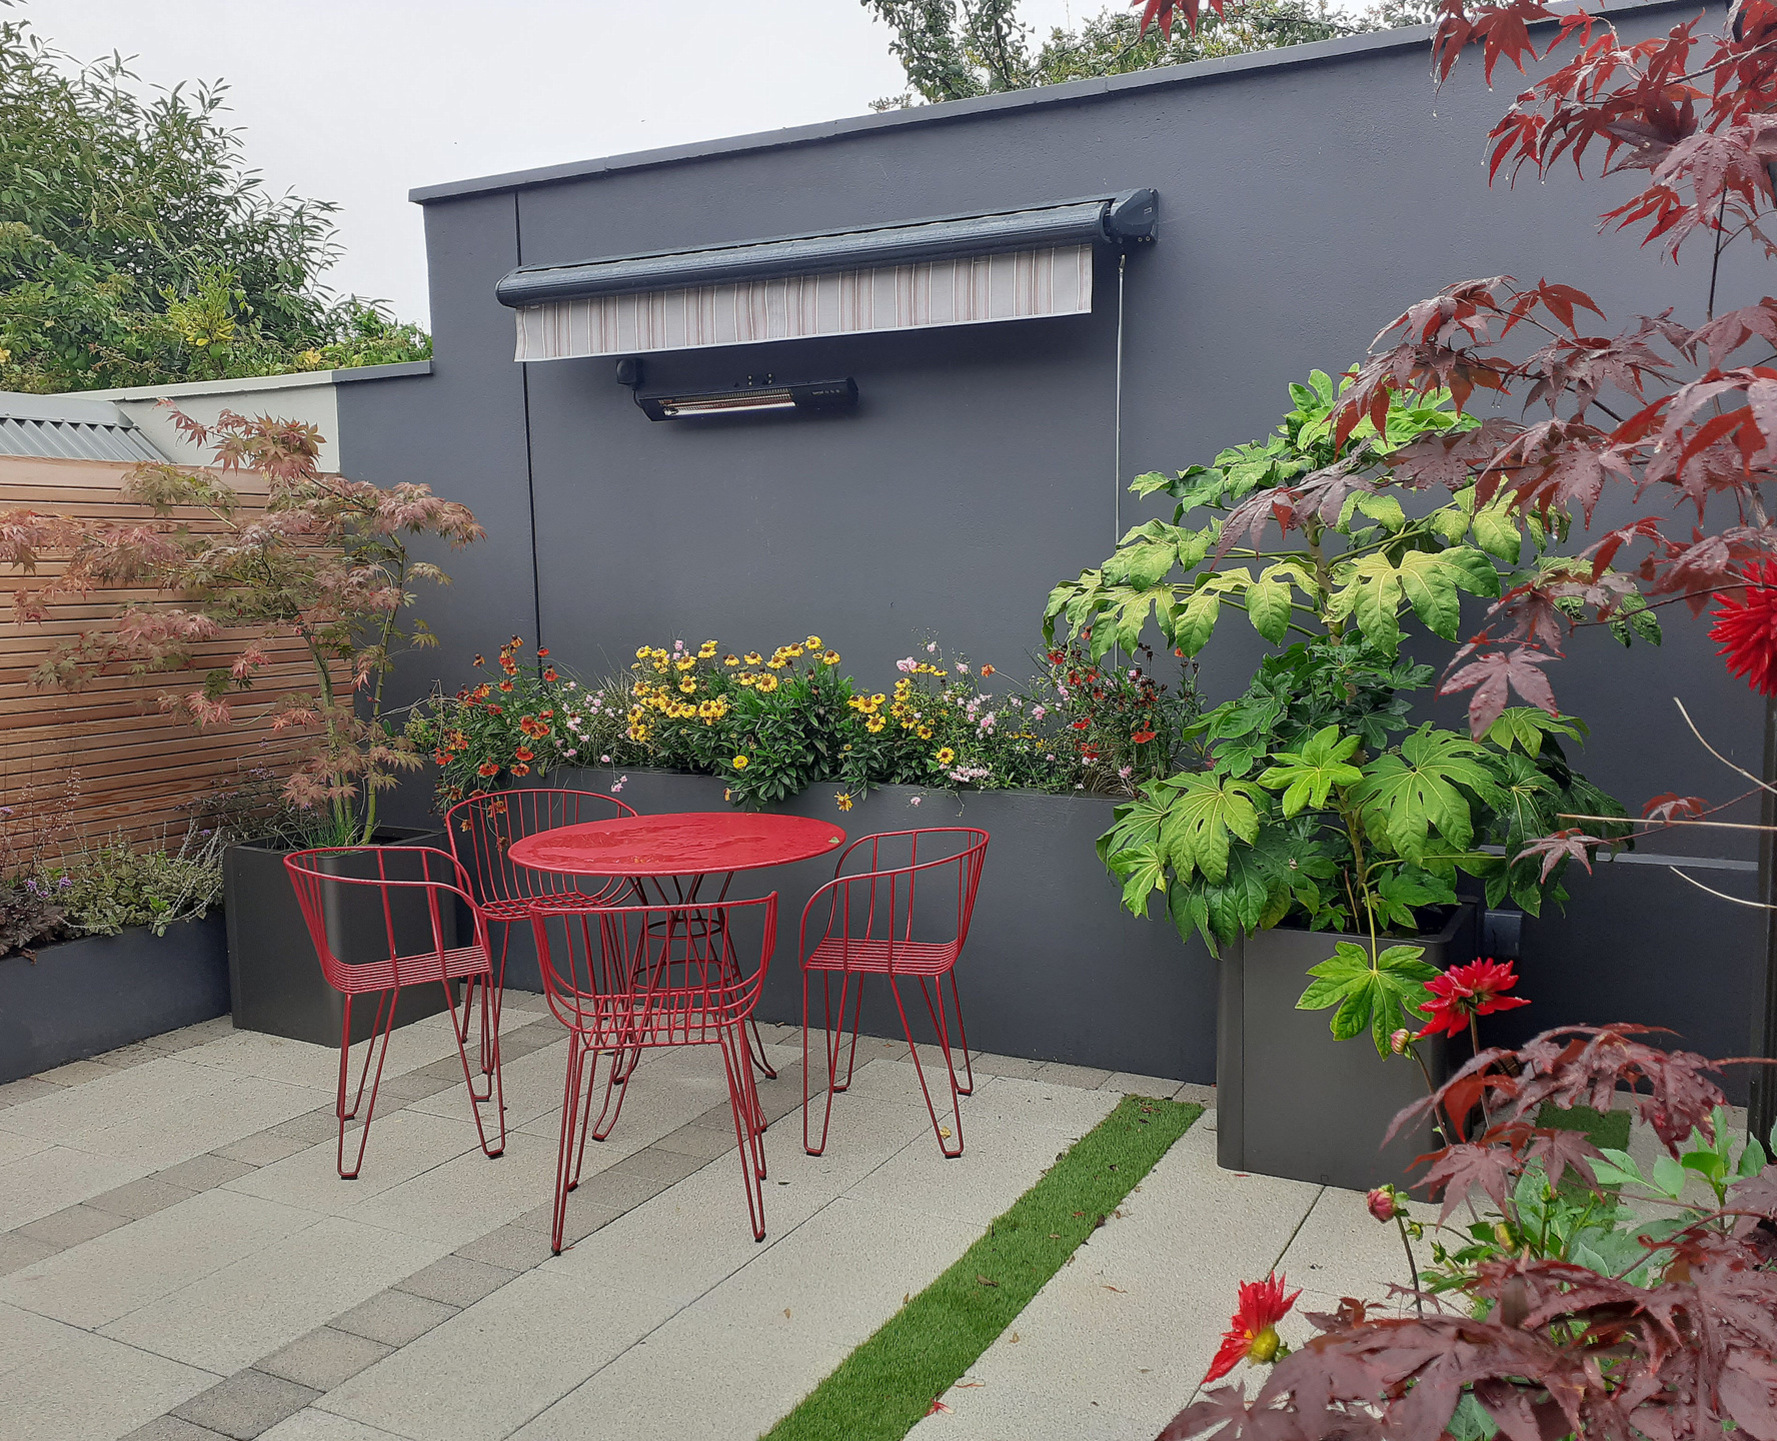 Planting Ideas for small spaces, to create colour, impact and stimulation | Dundrum, Dublin 18